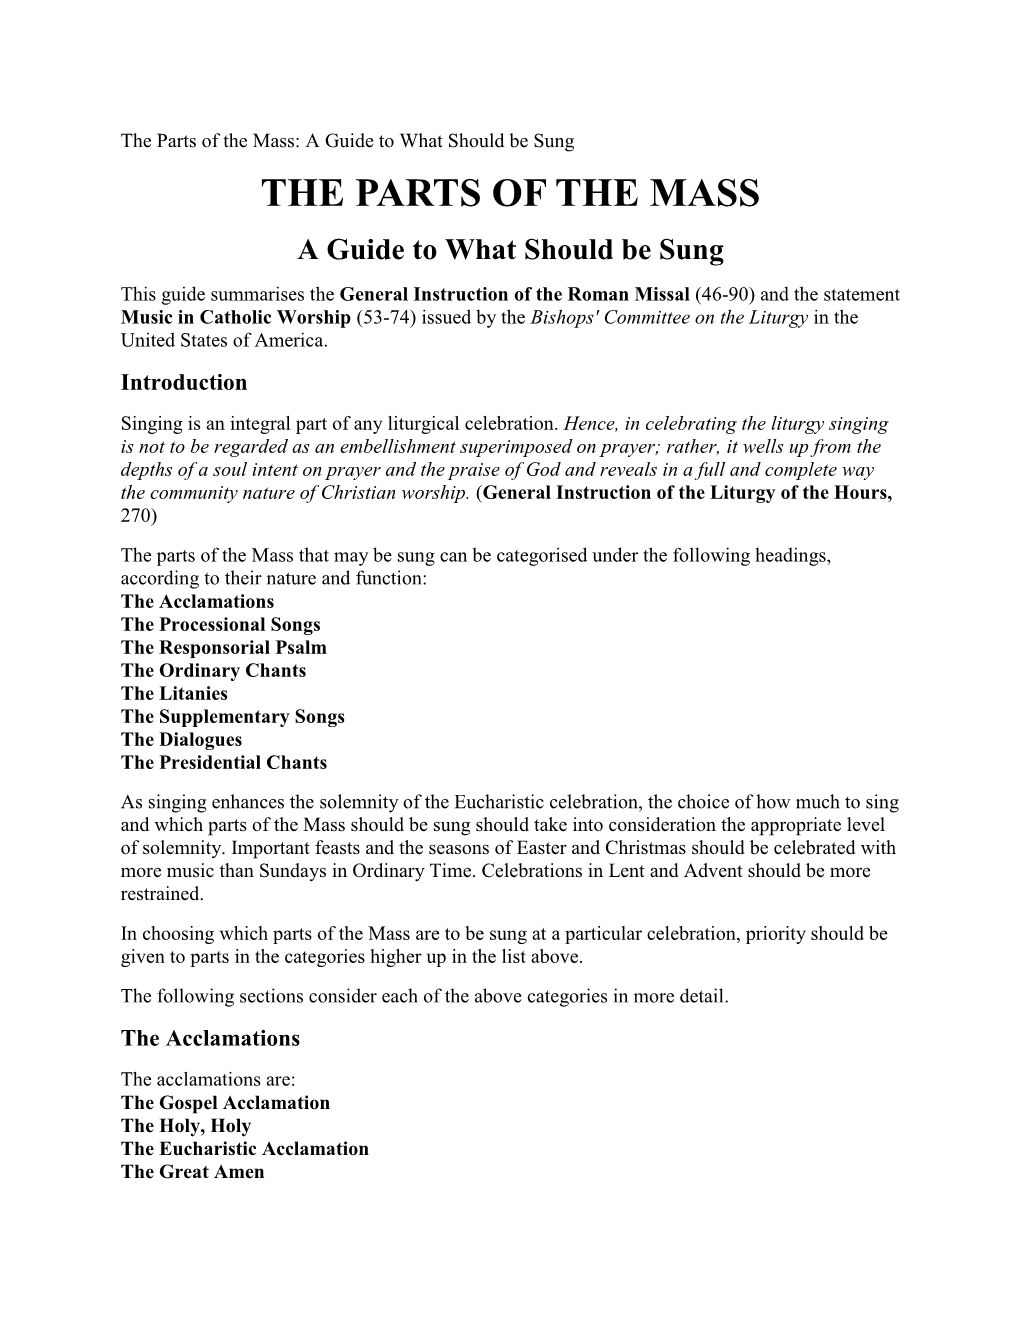 The Parts of the Mass: a Guide to What Should Be Sung